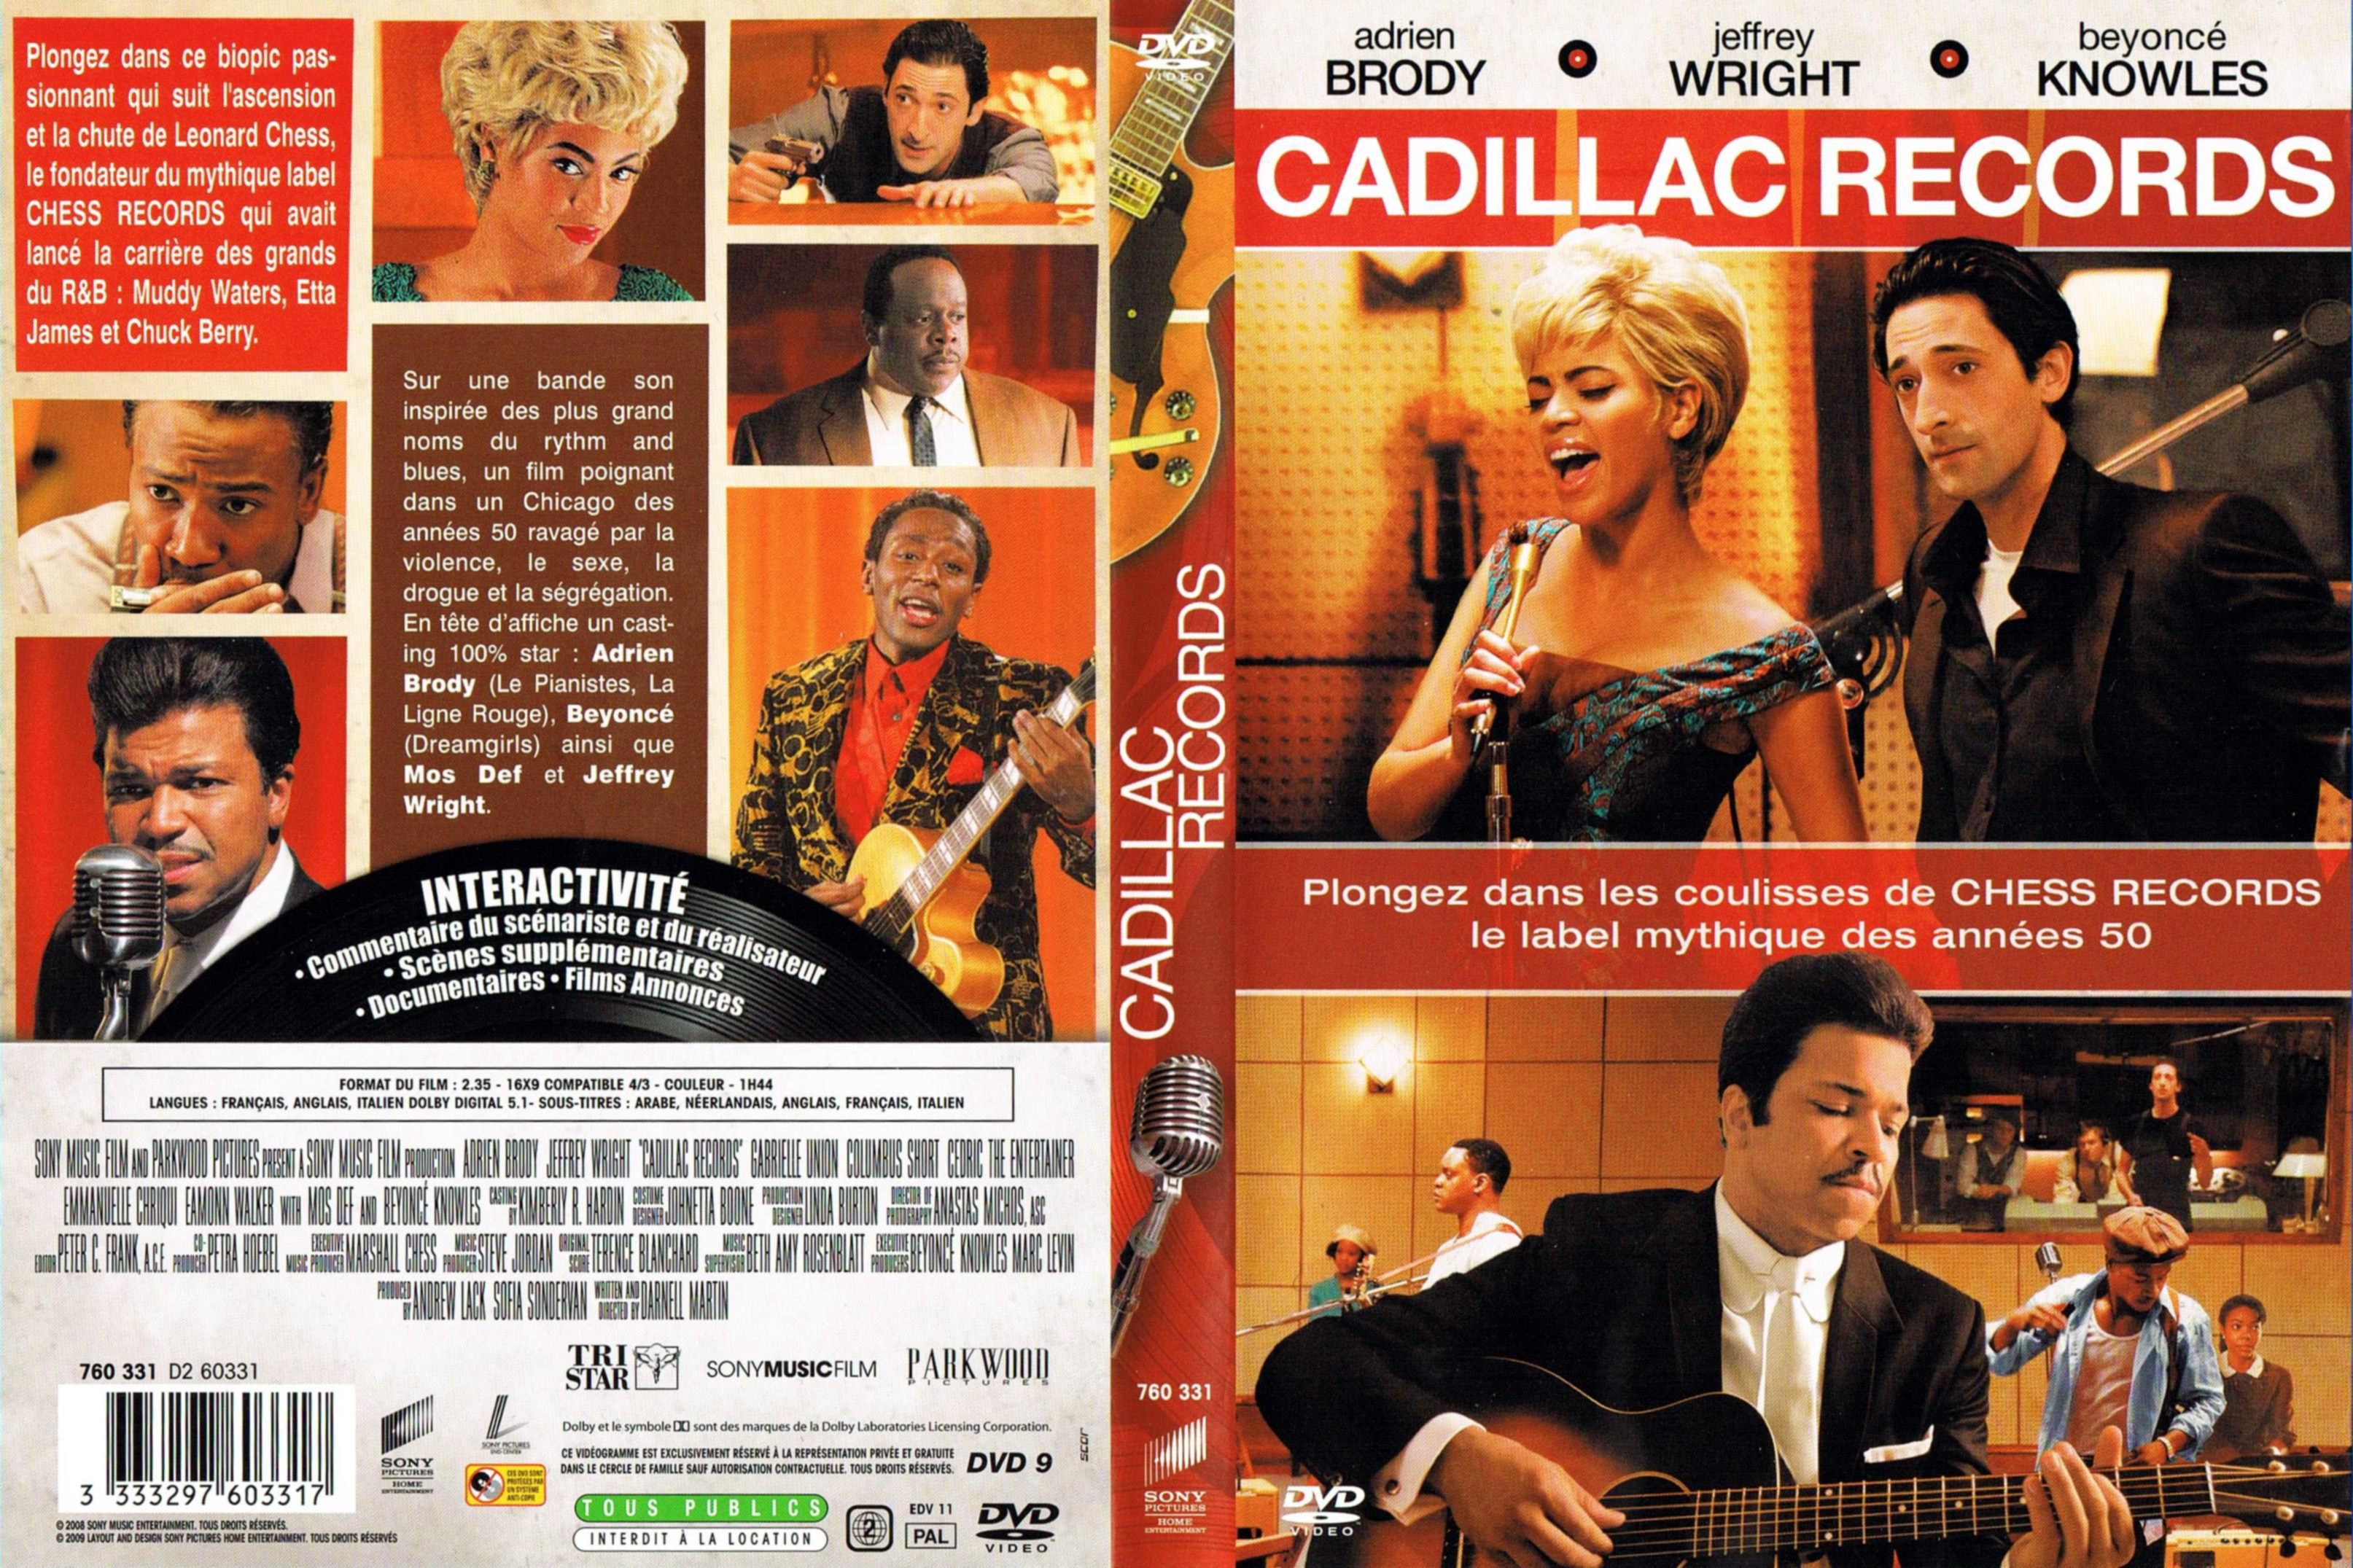 Jaquette DVD Cadillac records